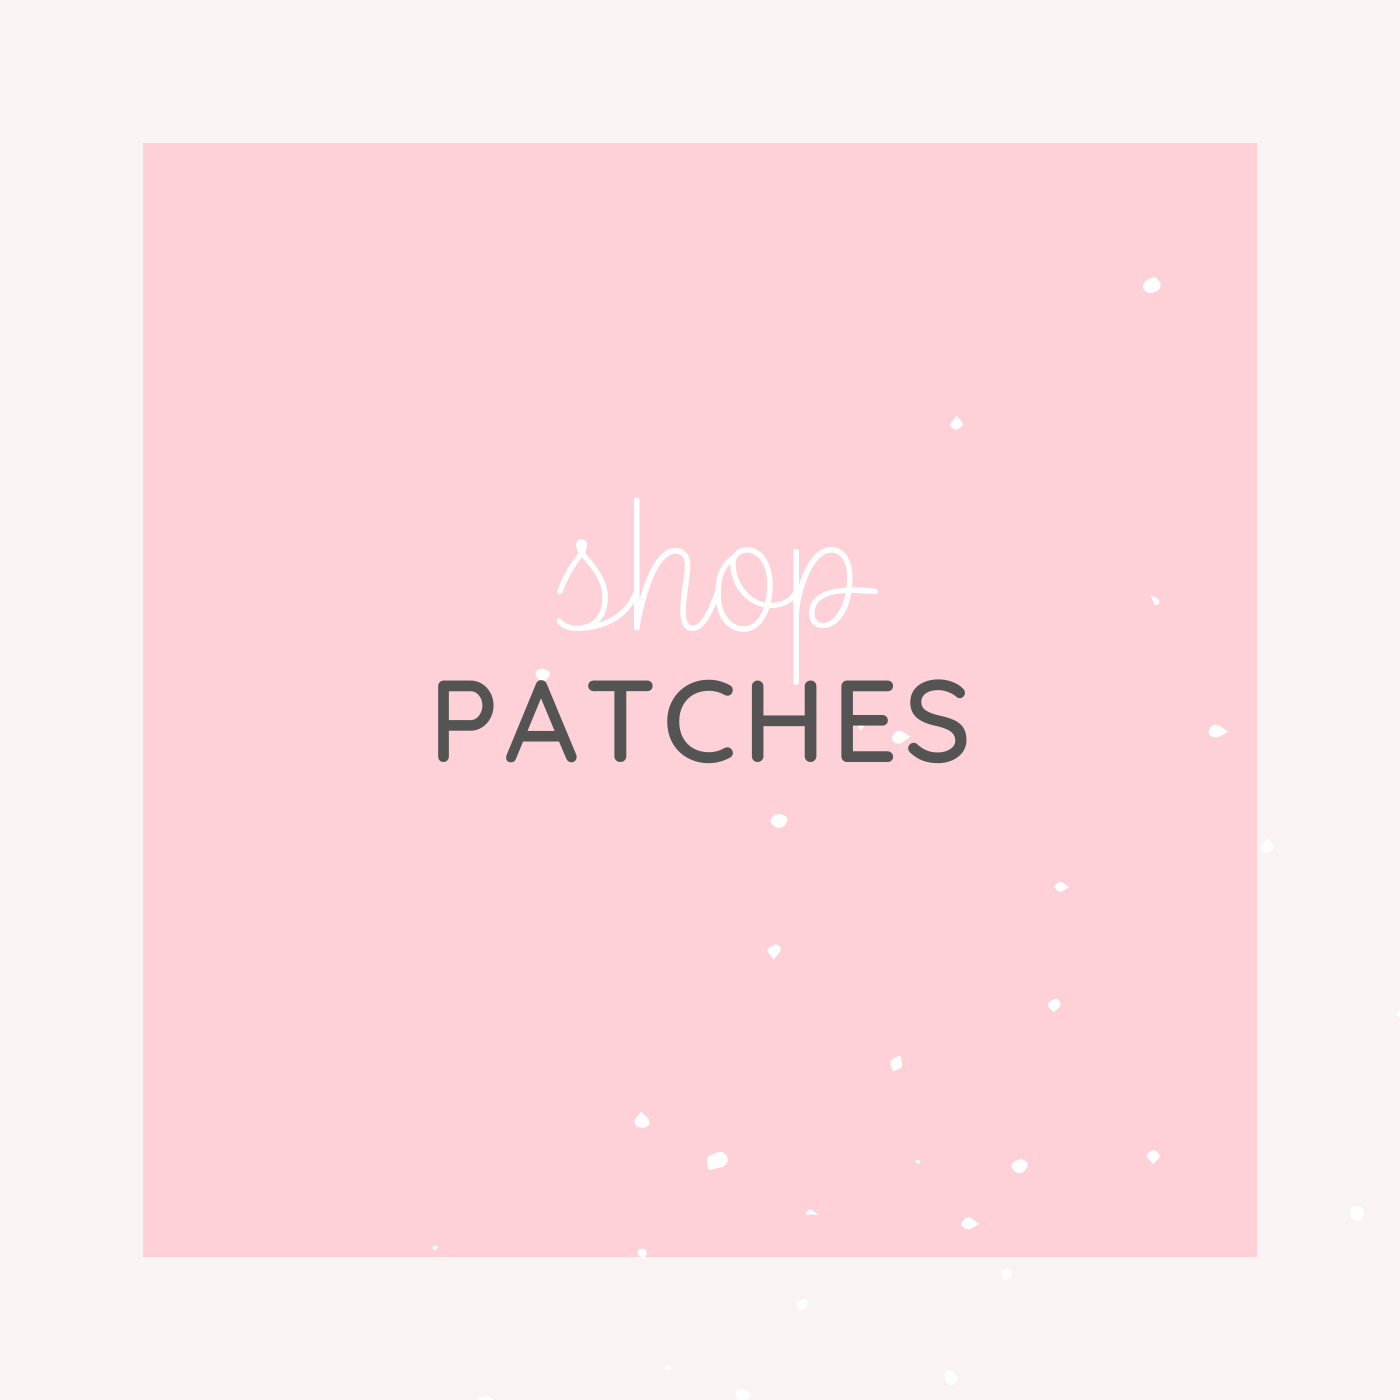 All Patches